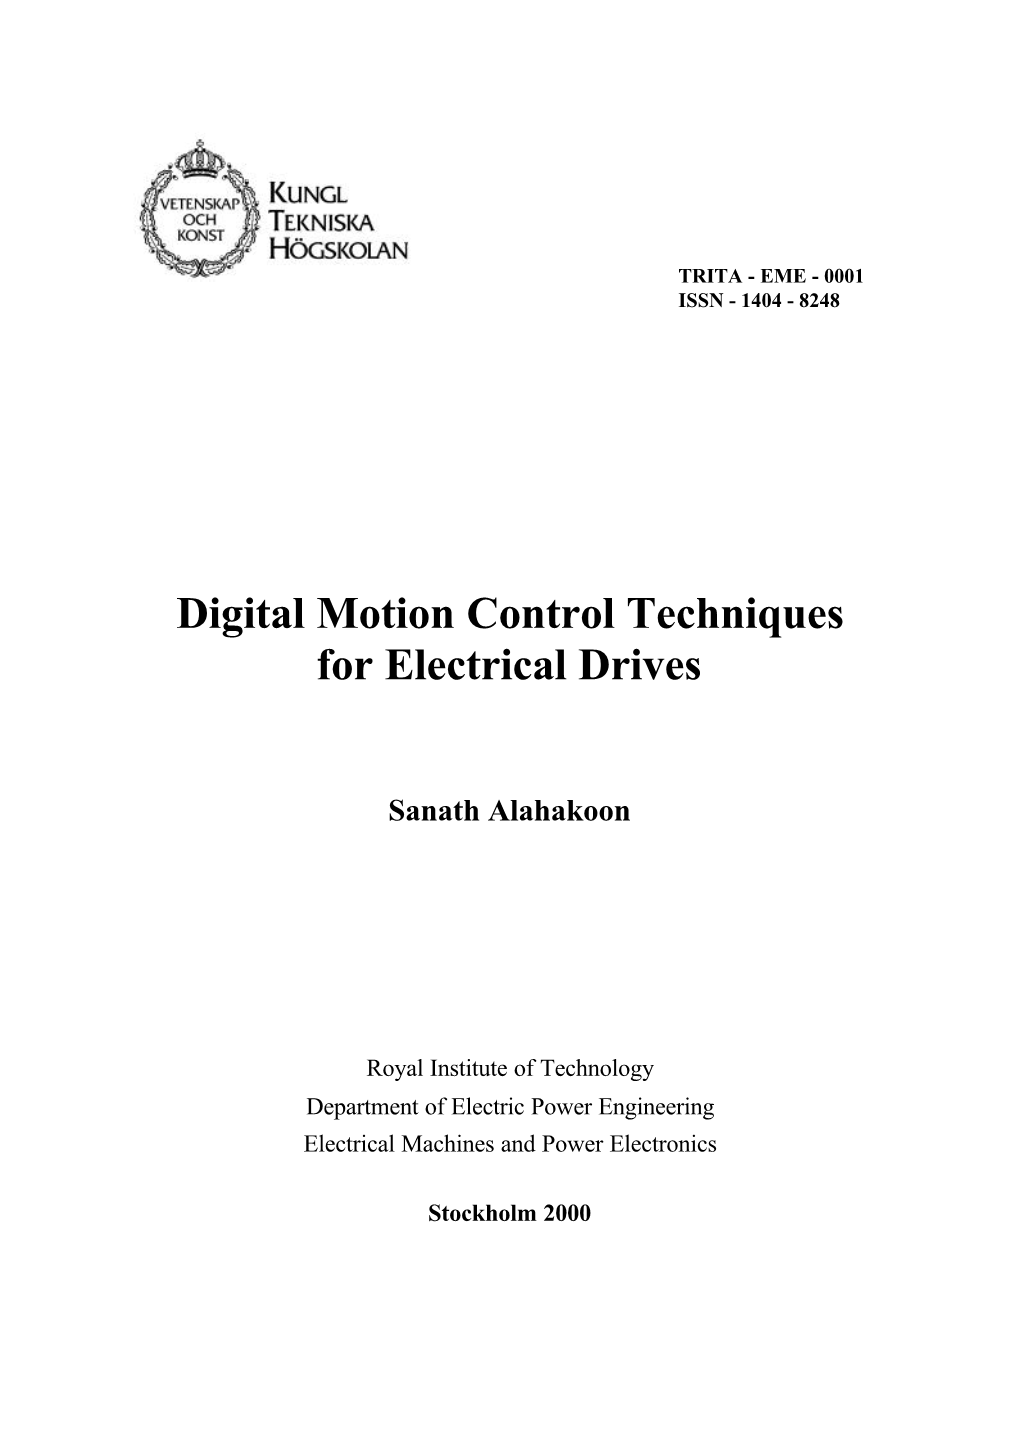 Digital Motion Control Techniques for Electrical Drives